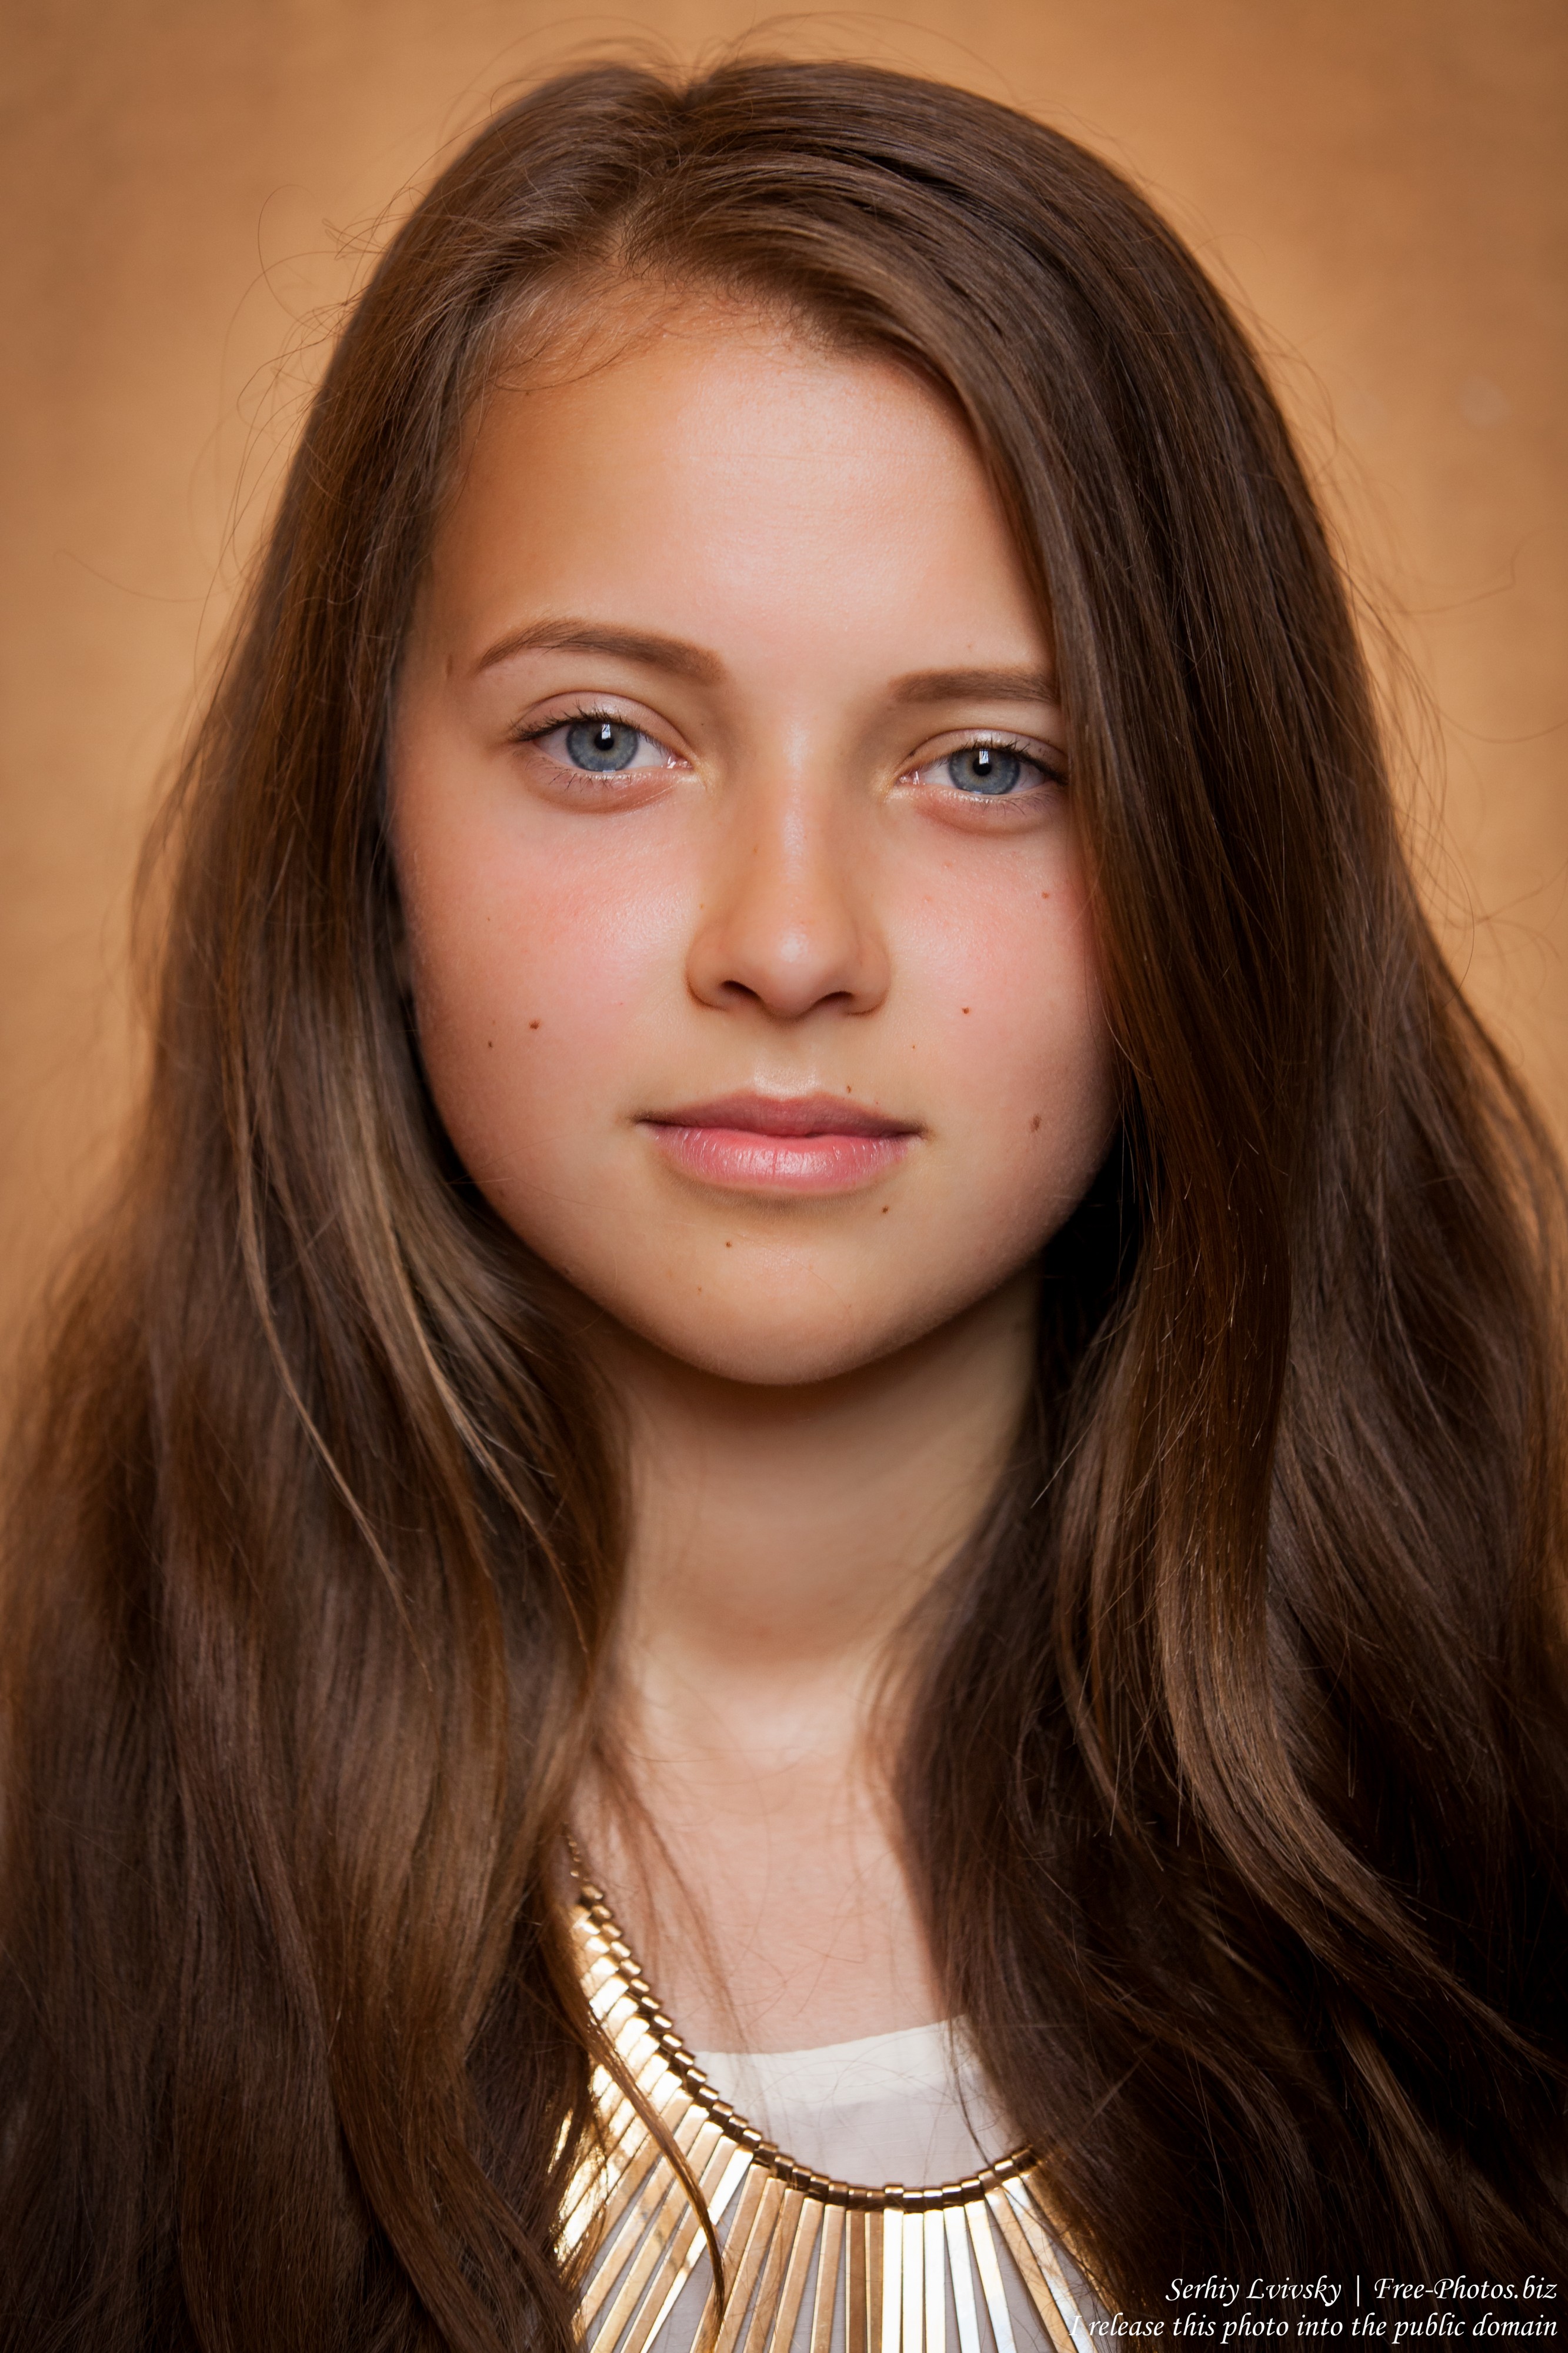 Photo Of A Cute 15 Year Old Girl Photographed In July 2015 Picture 6